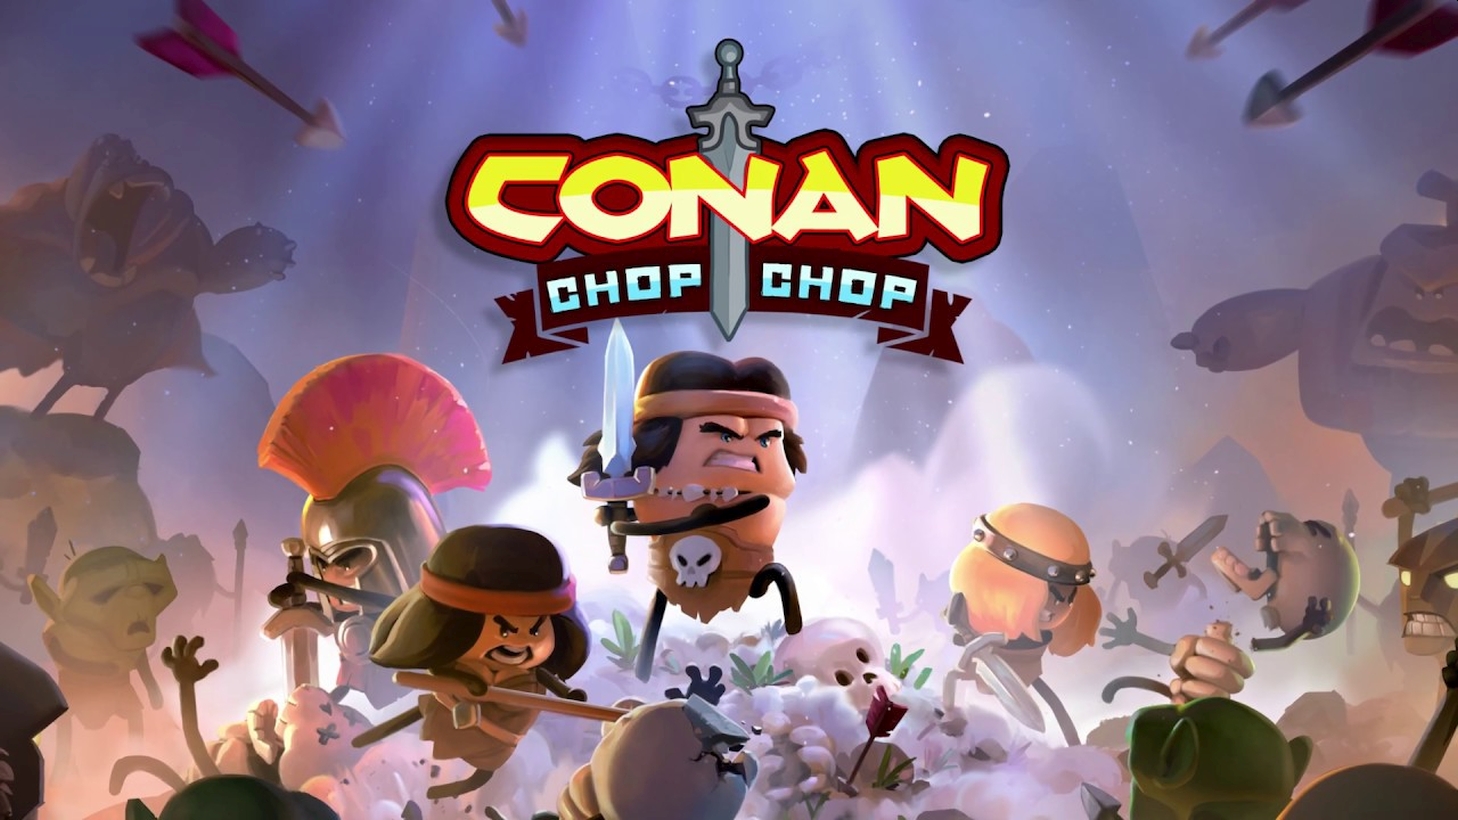 Conan Chop Chop Faces Another Delay With Planned Launch Now In Early 2021